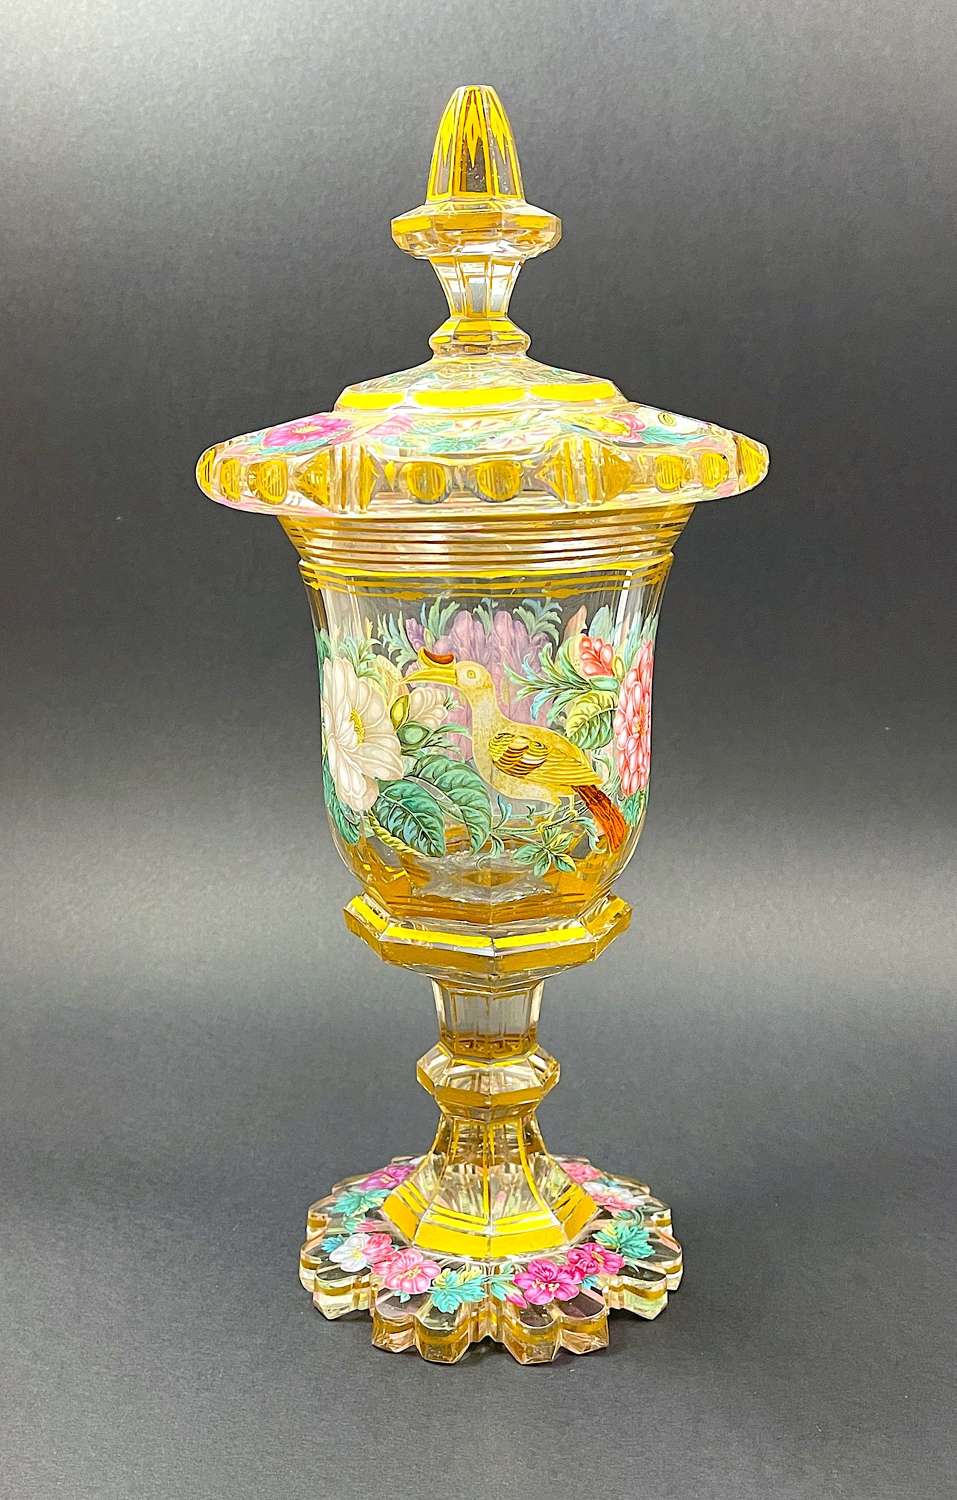 Rare Antique Bohemian Goblet Decorated with Flowers & Birds